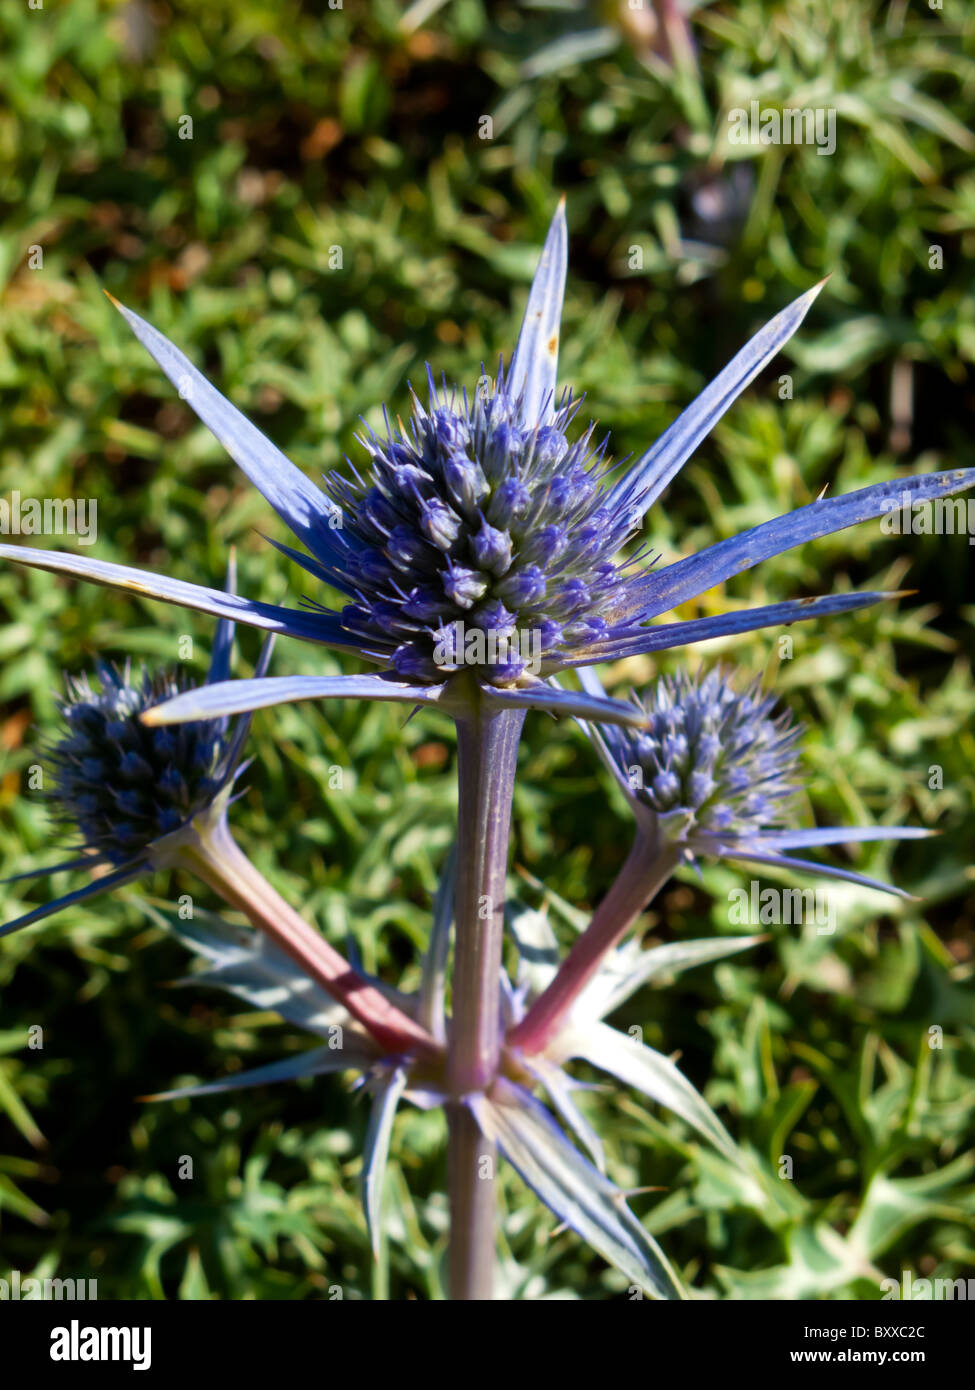 Mediterranean Sea Holly Eryngium bourgatii Apiaceae wild flowers growing in the Picos de Europa mountains in northern Spain Stock Photo